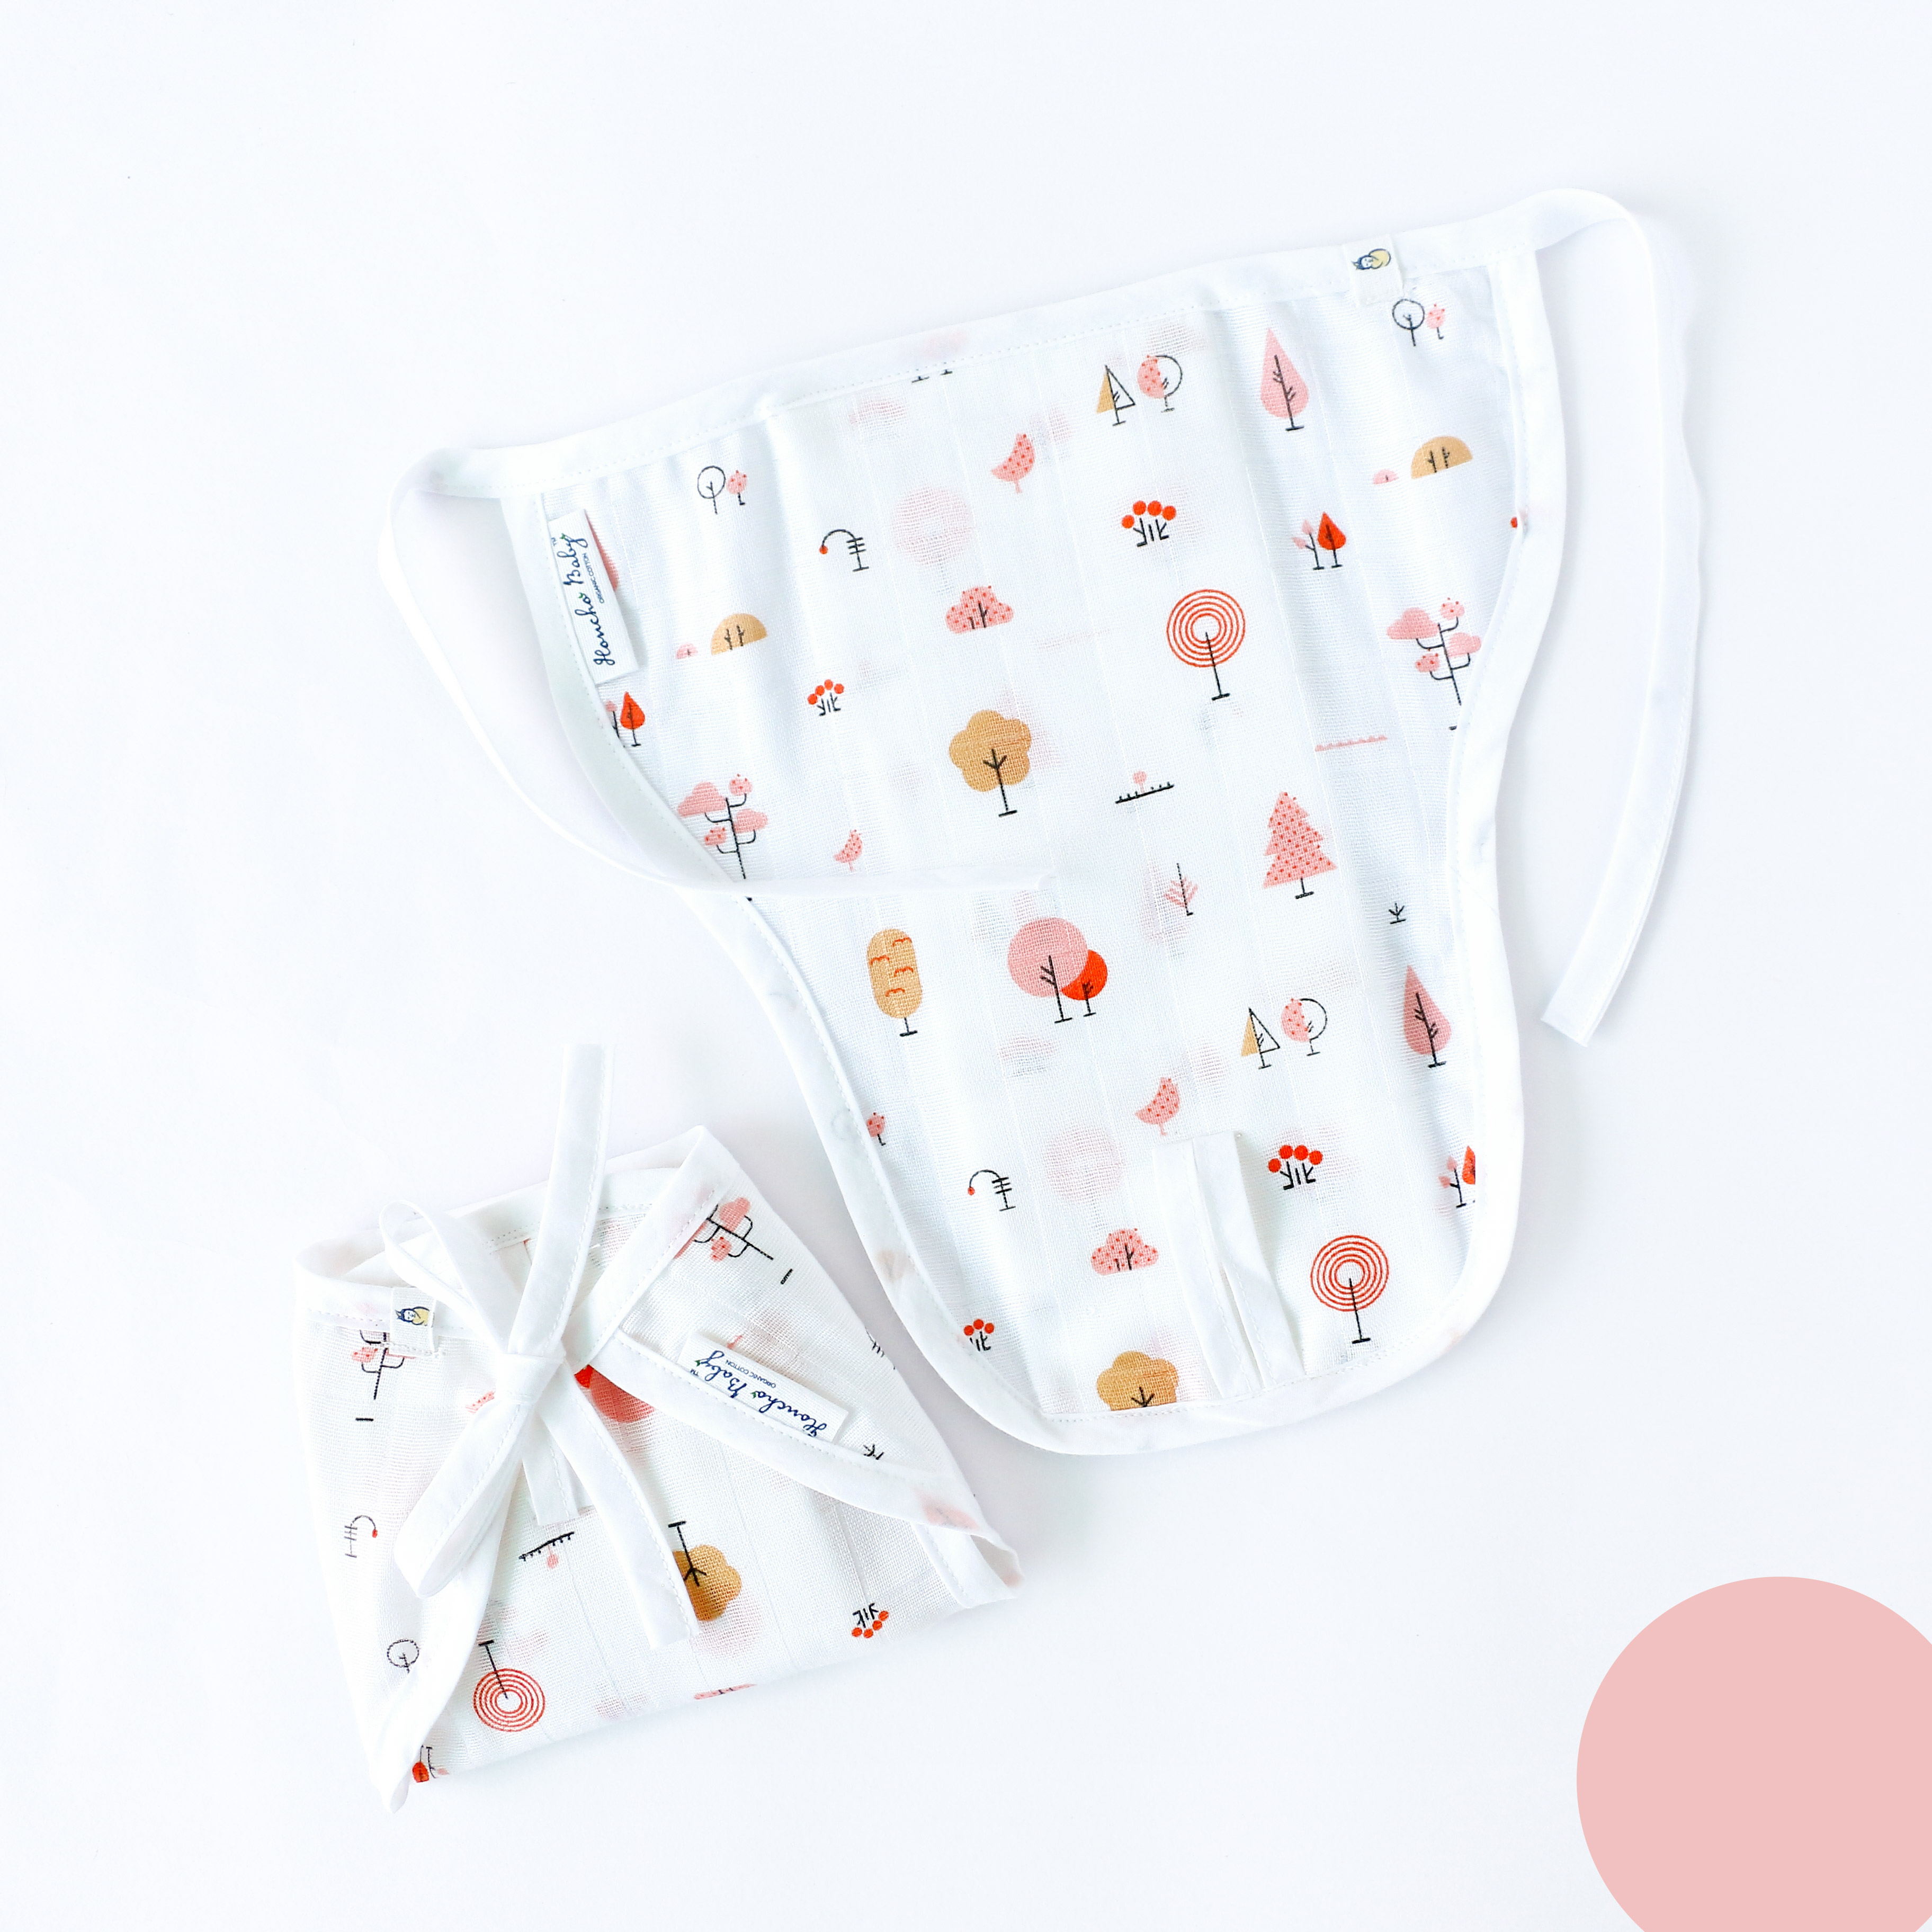 Unisex Muslin Knot Jablas-5 & Nappies-5 ( Assorted Pack of 10 ) newborn to 4 months